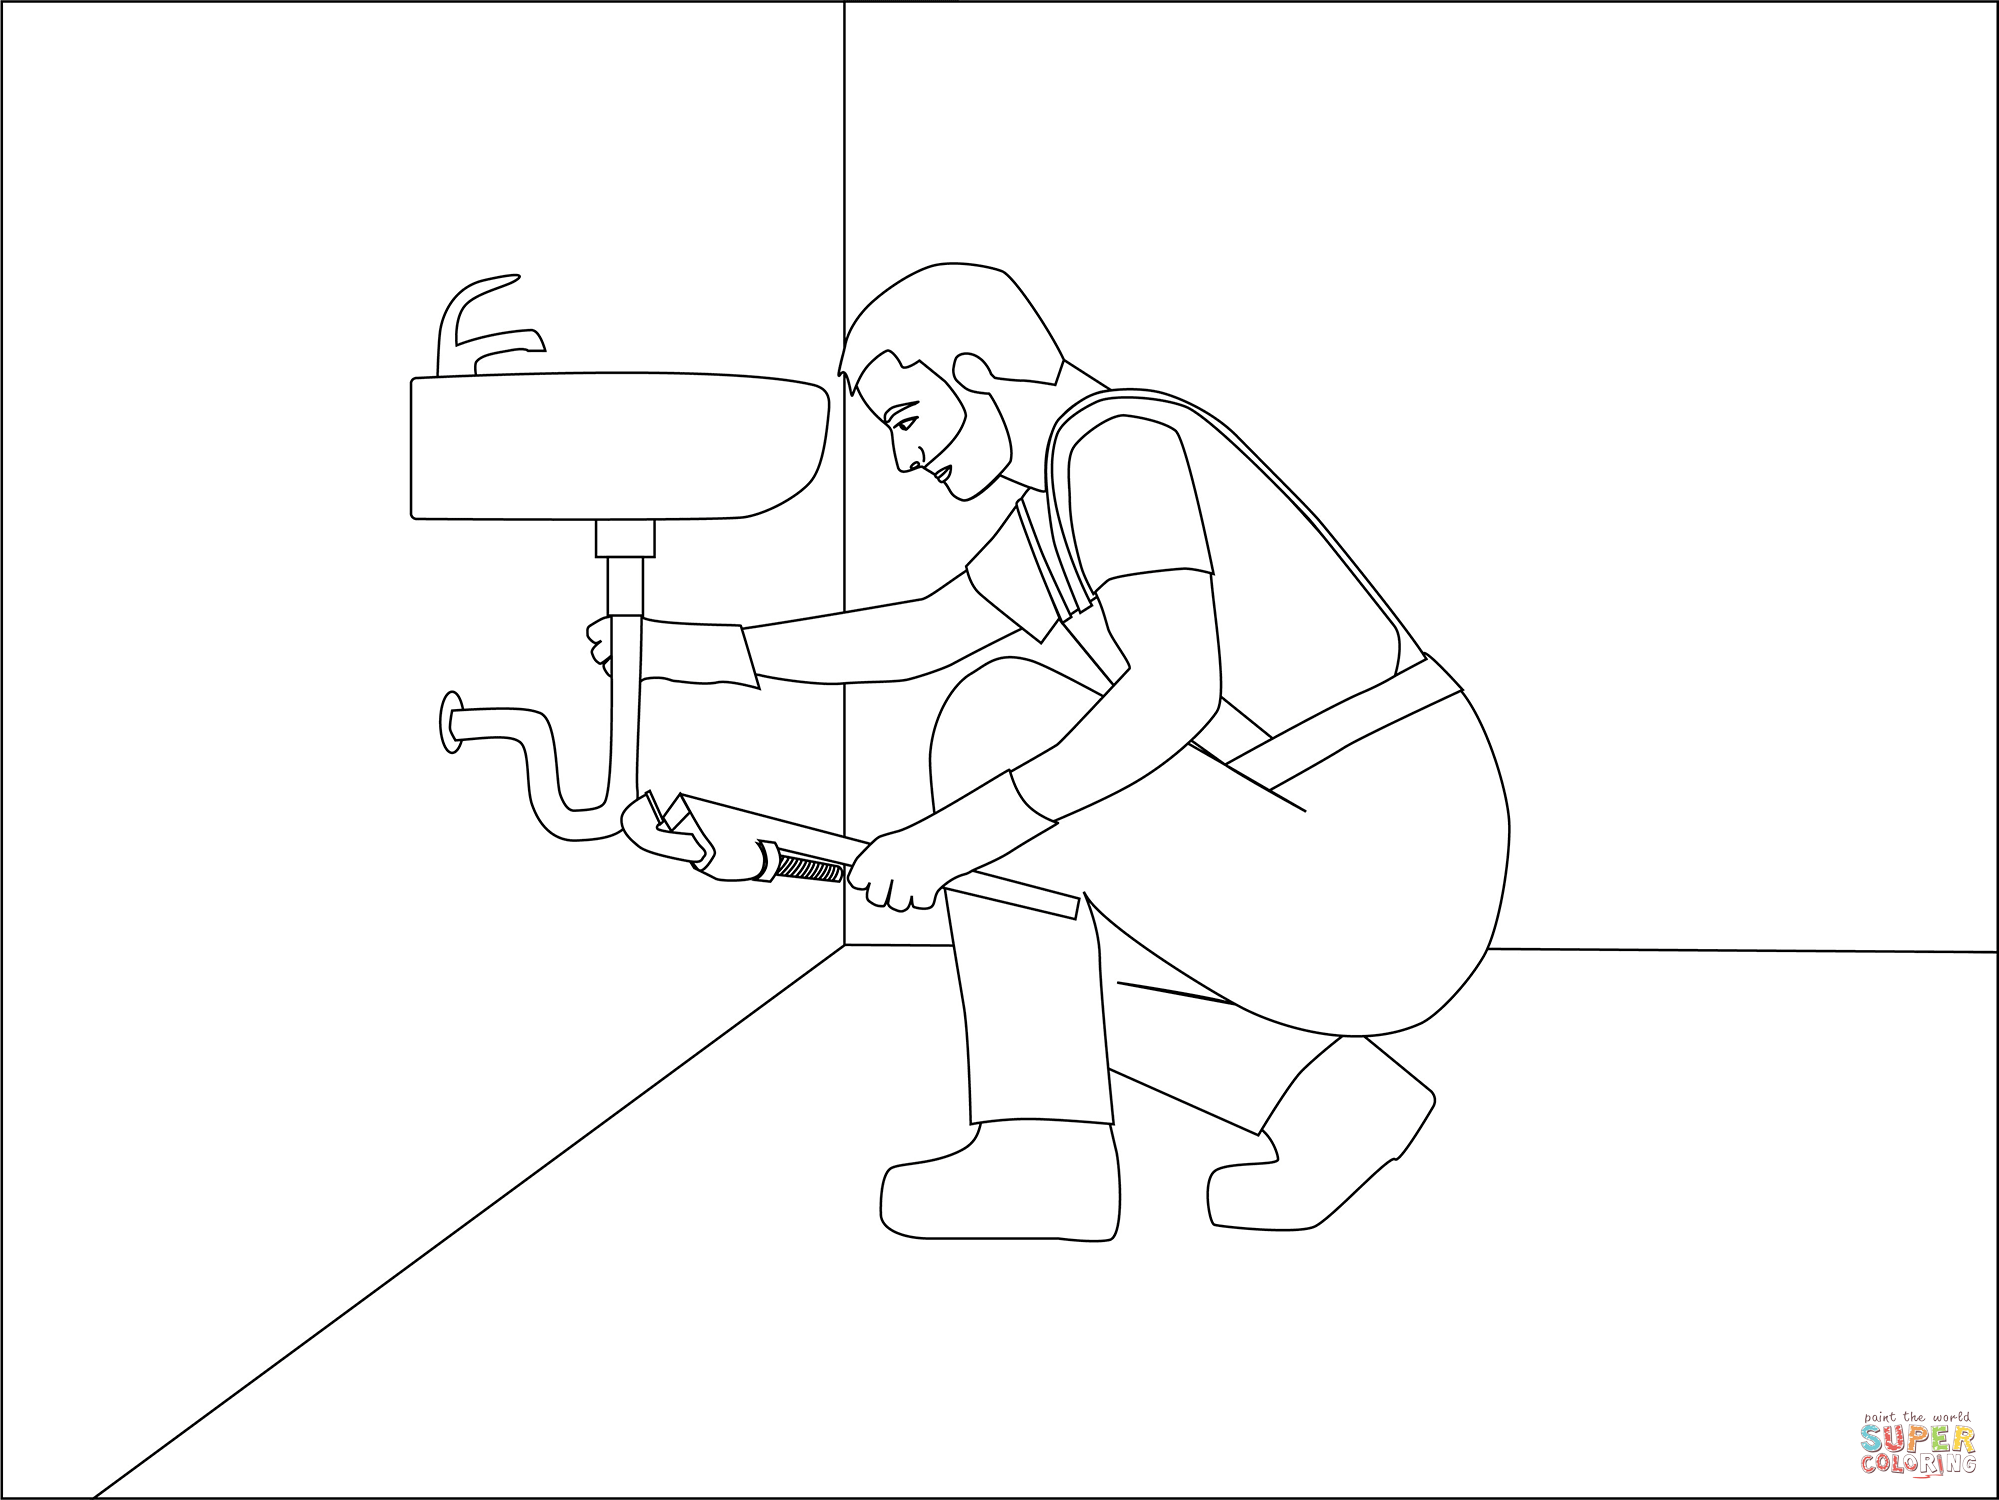 Plumber coloring page | Free Printable Coloring Pages